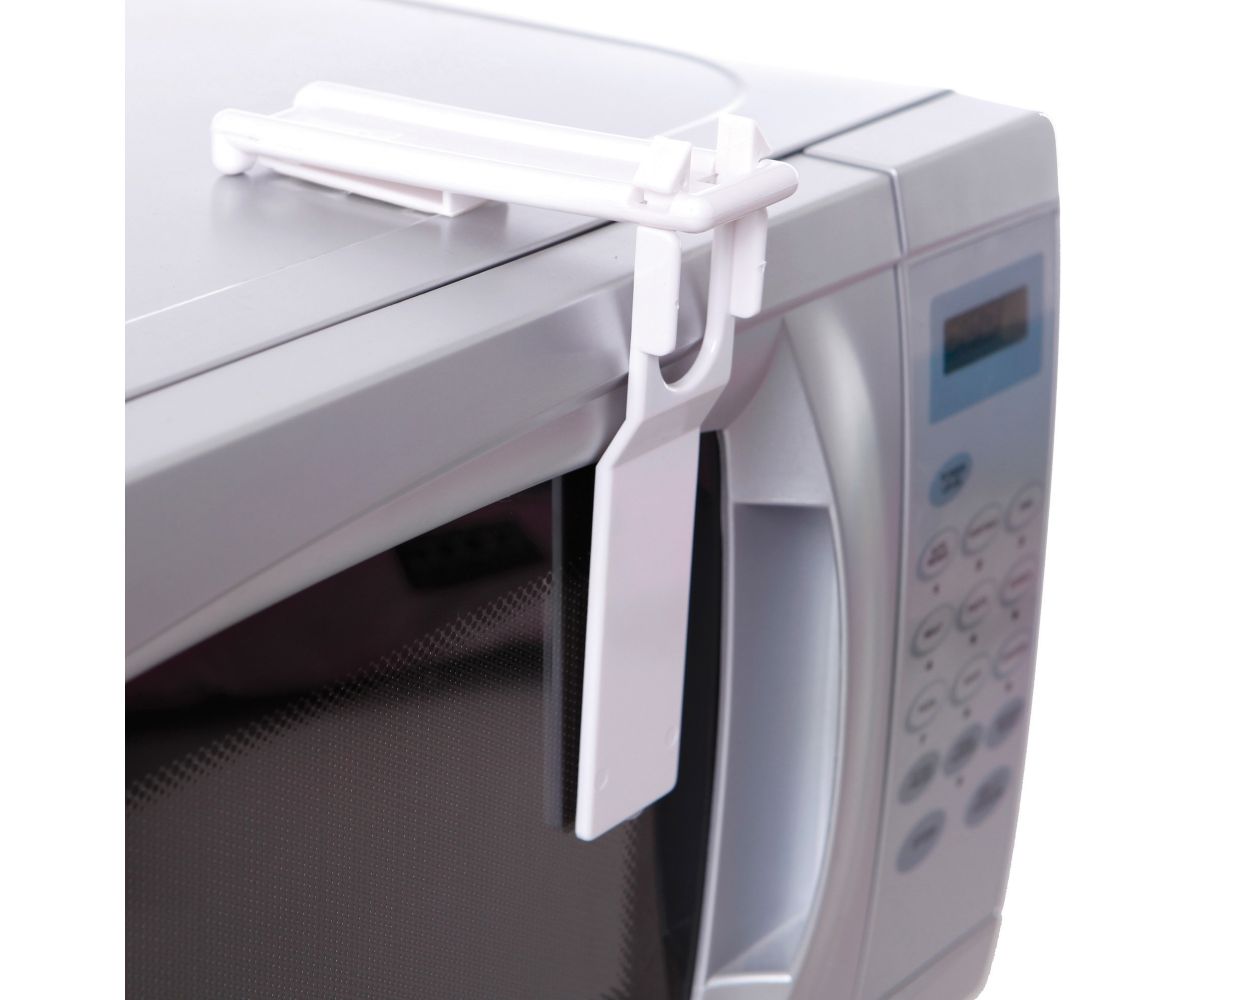 Microwave oven safety lock